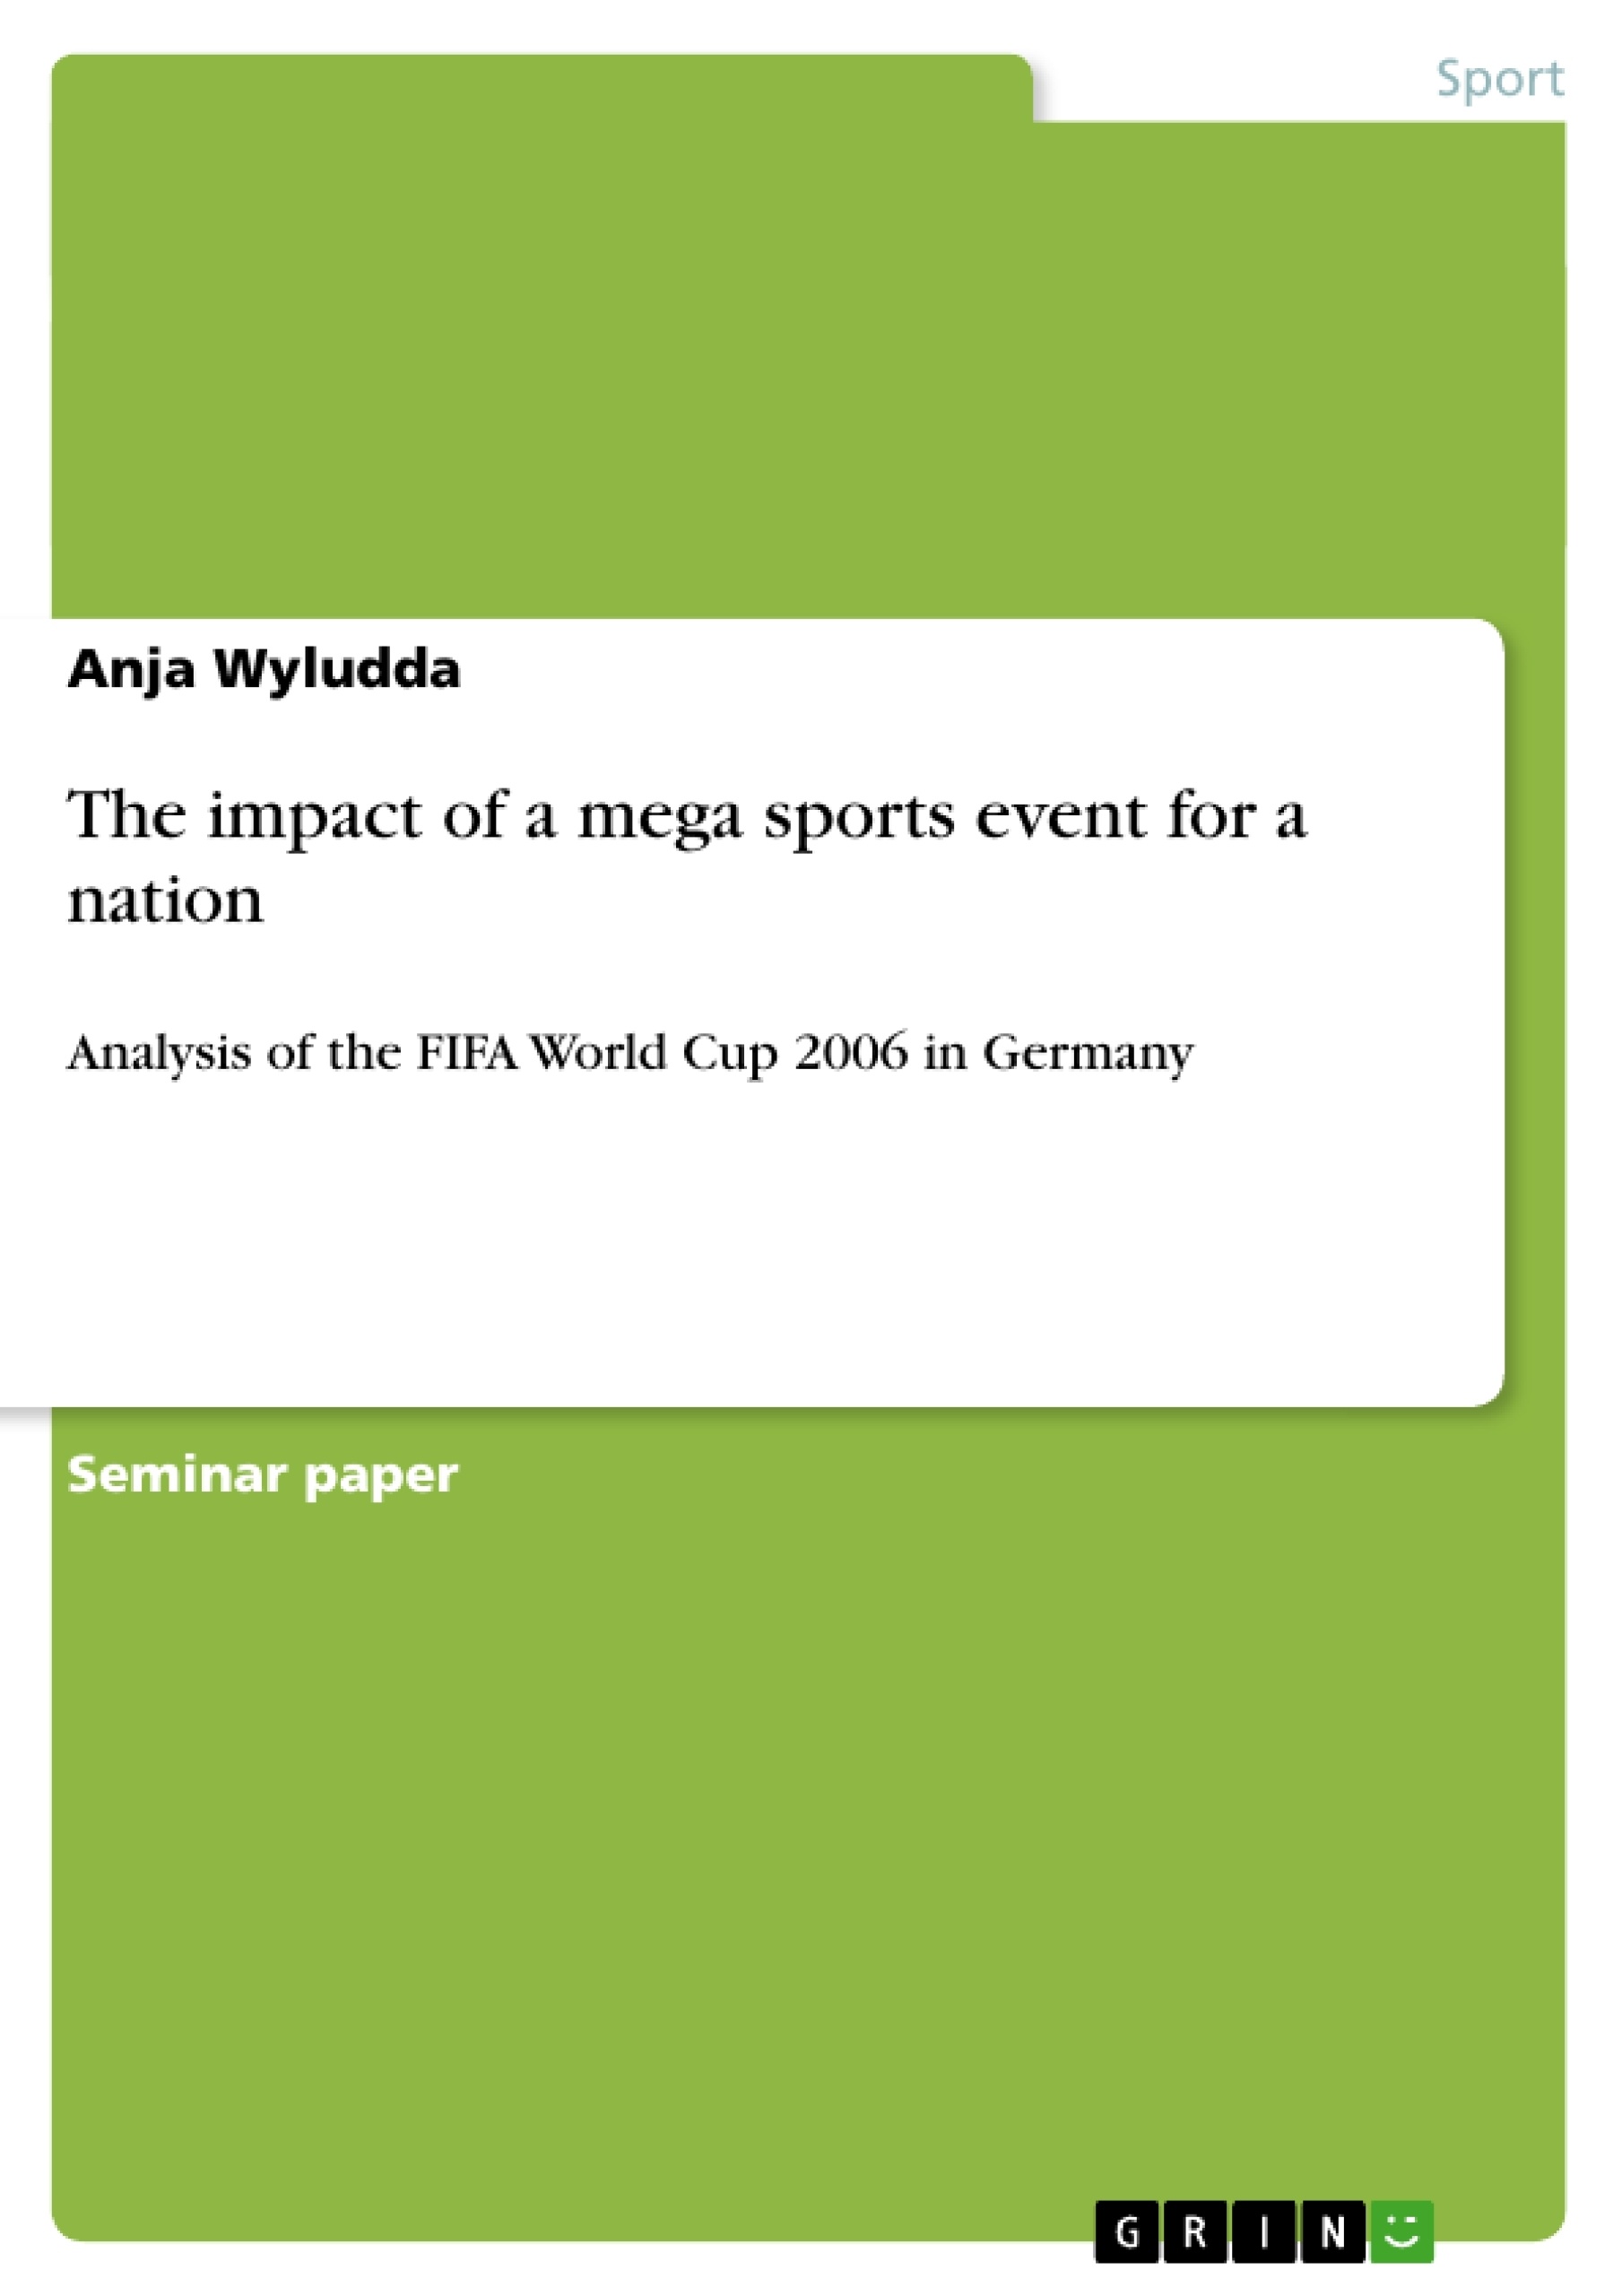 Titel: The impact of a mega sports event for a nation